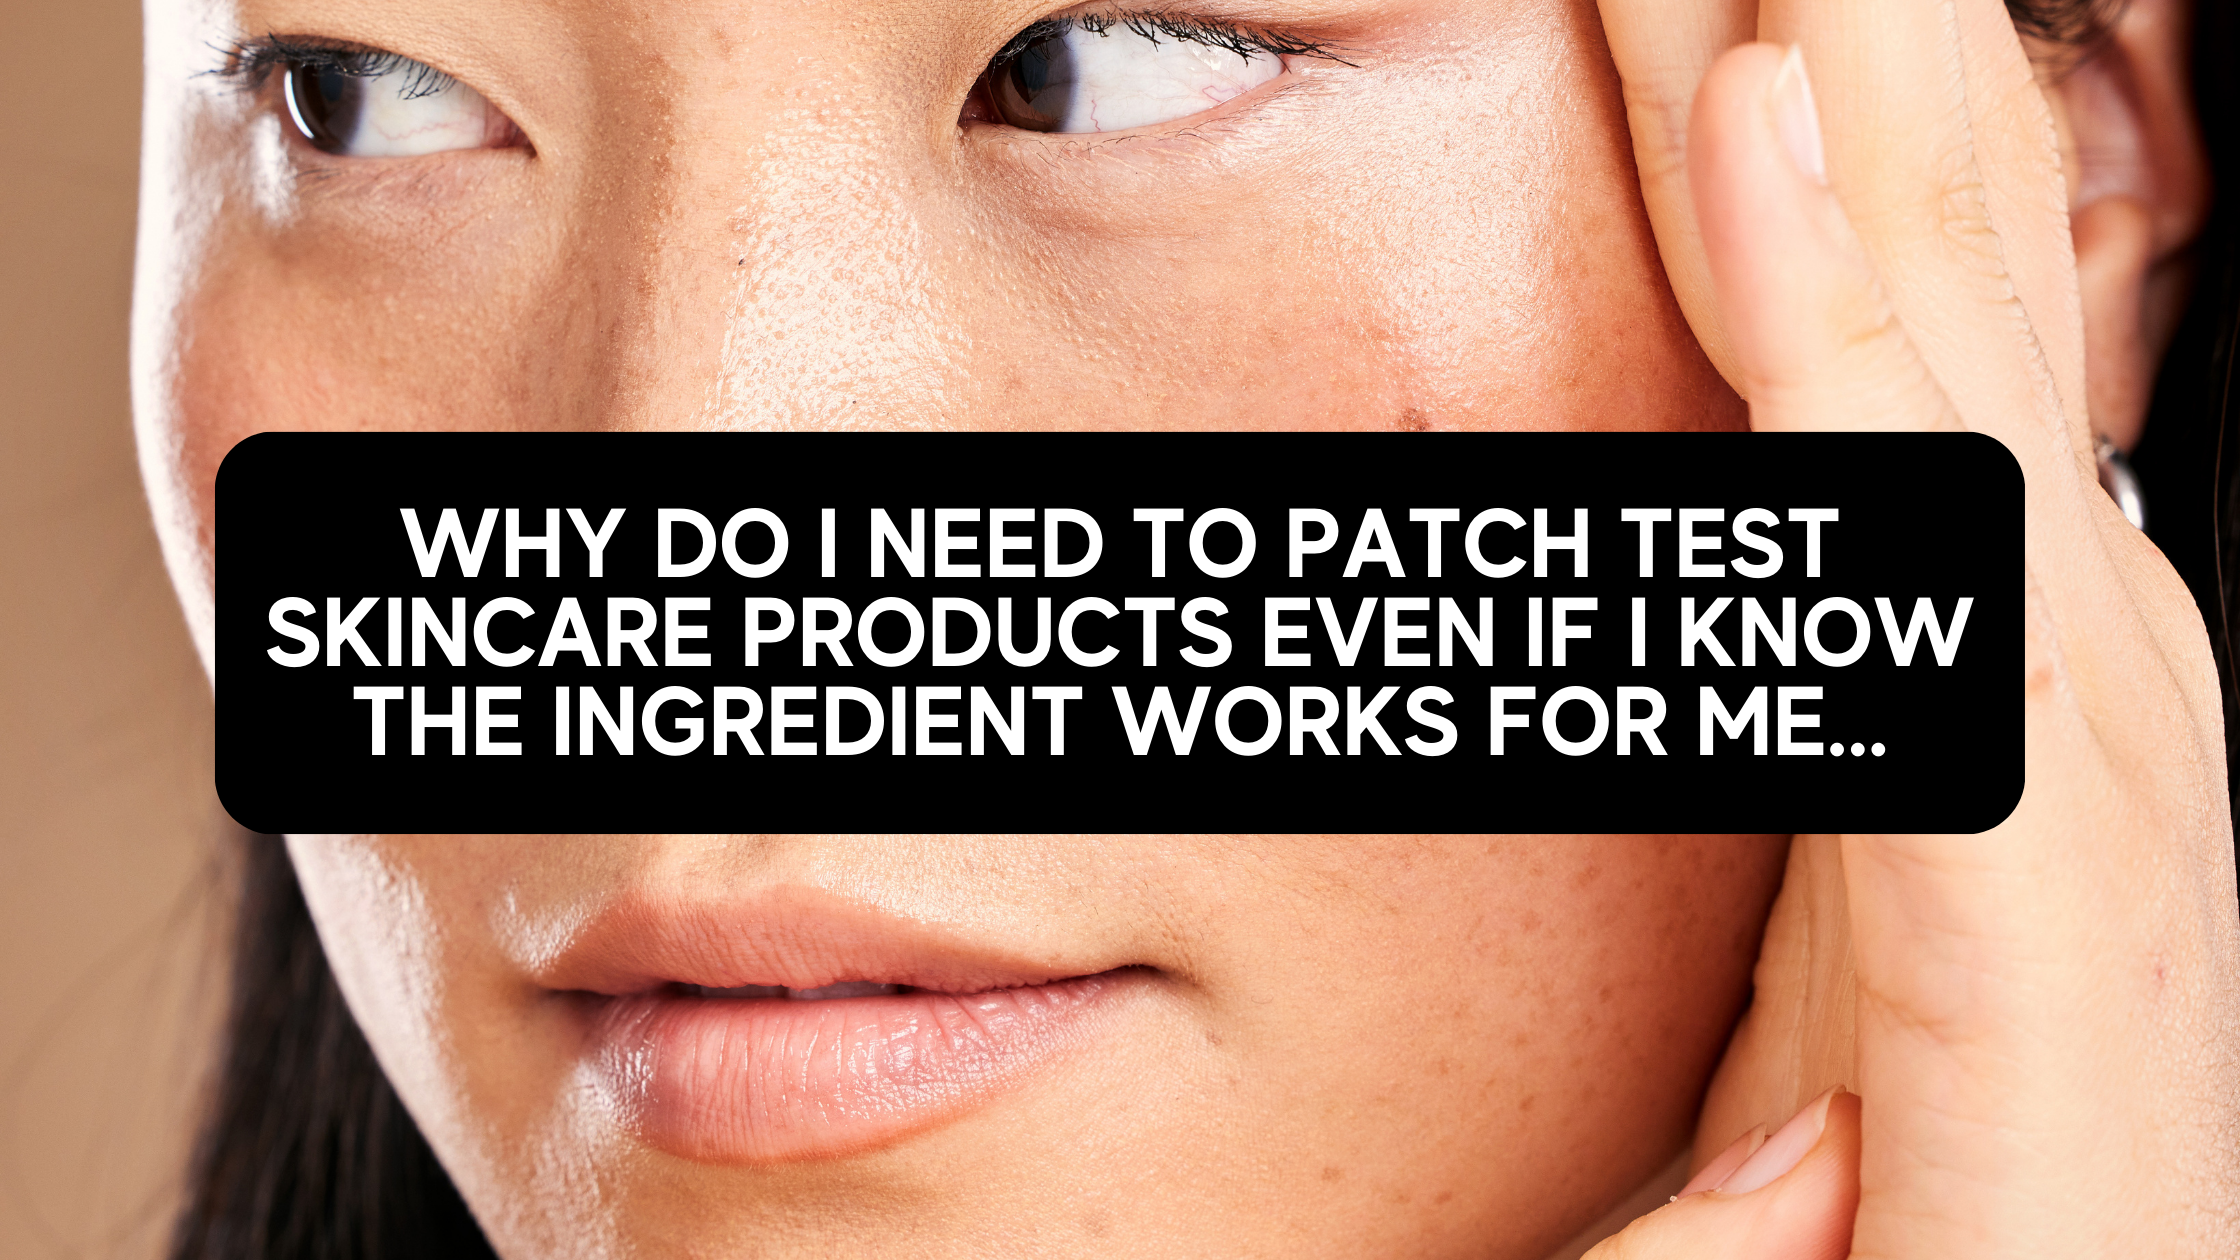 Protect Your Skin: The Importance of Patch Testing